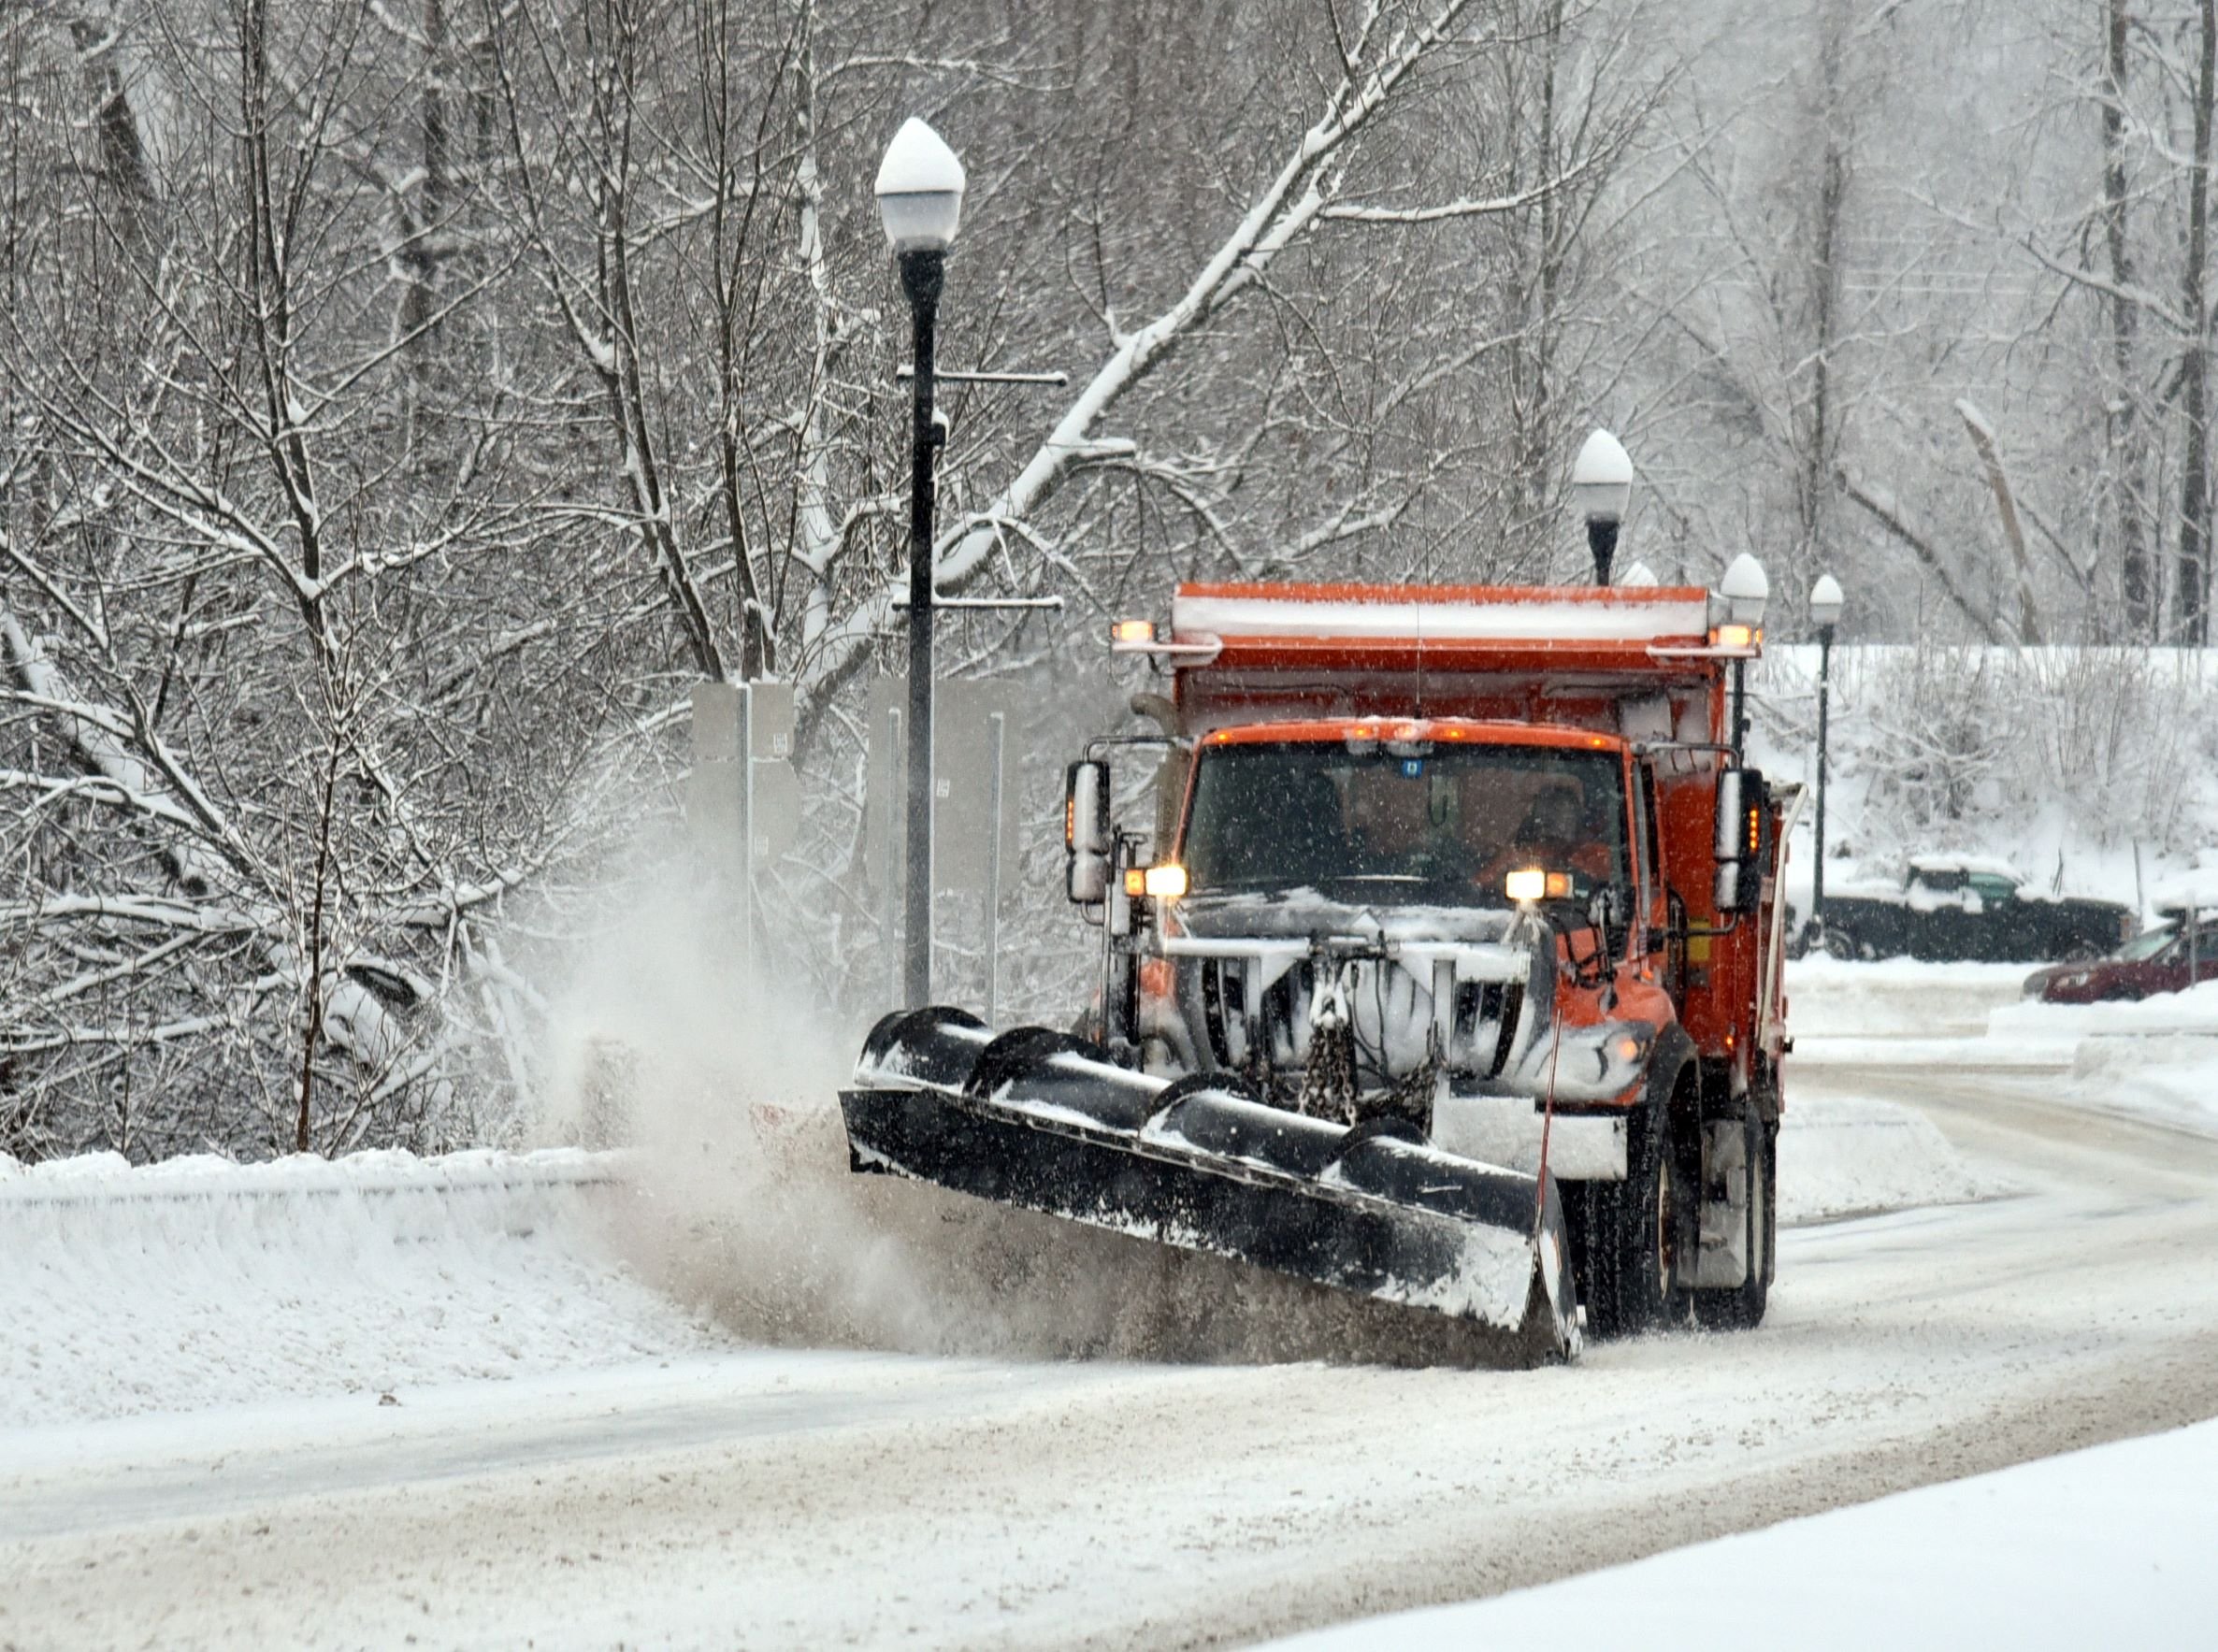  A VTrans plow takes a pass just above the roundabout heading towards the Interstate-89 ramps. Photo by Gordon Miller 